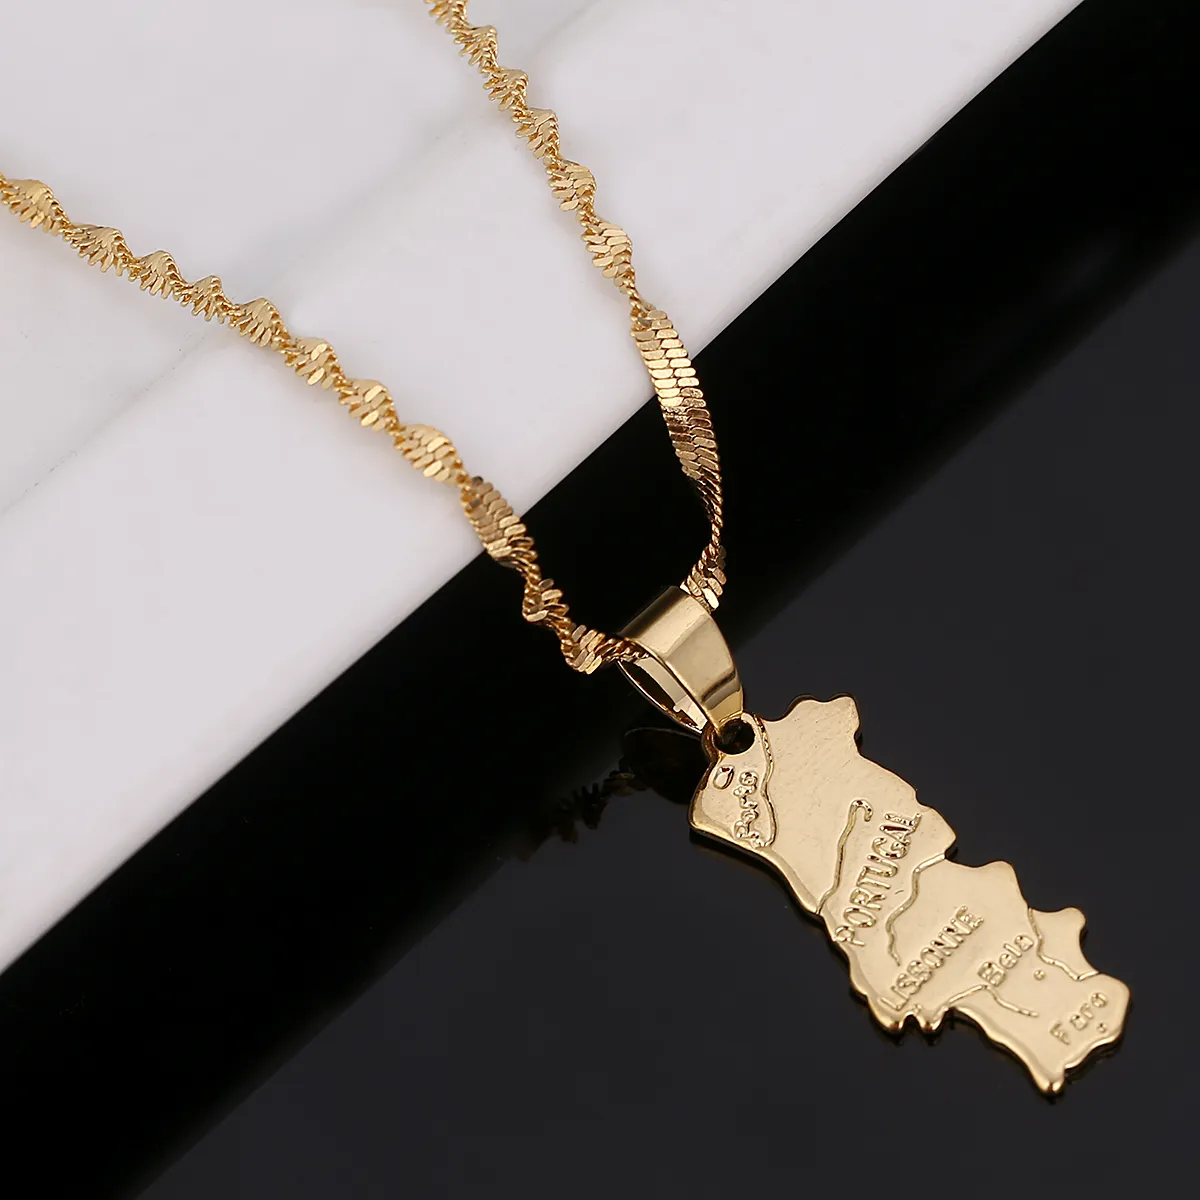 24K Gold Plated Portugal Map Pendant Necklace Jewelry Portuguese jewelry Gift260a